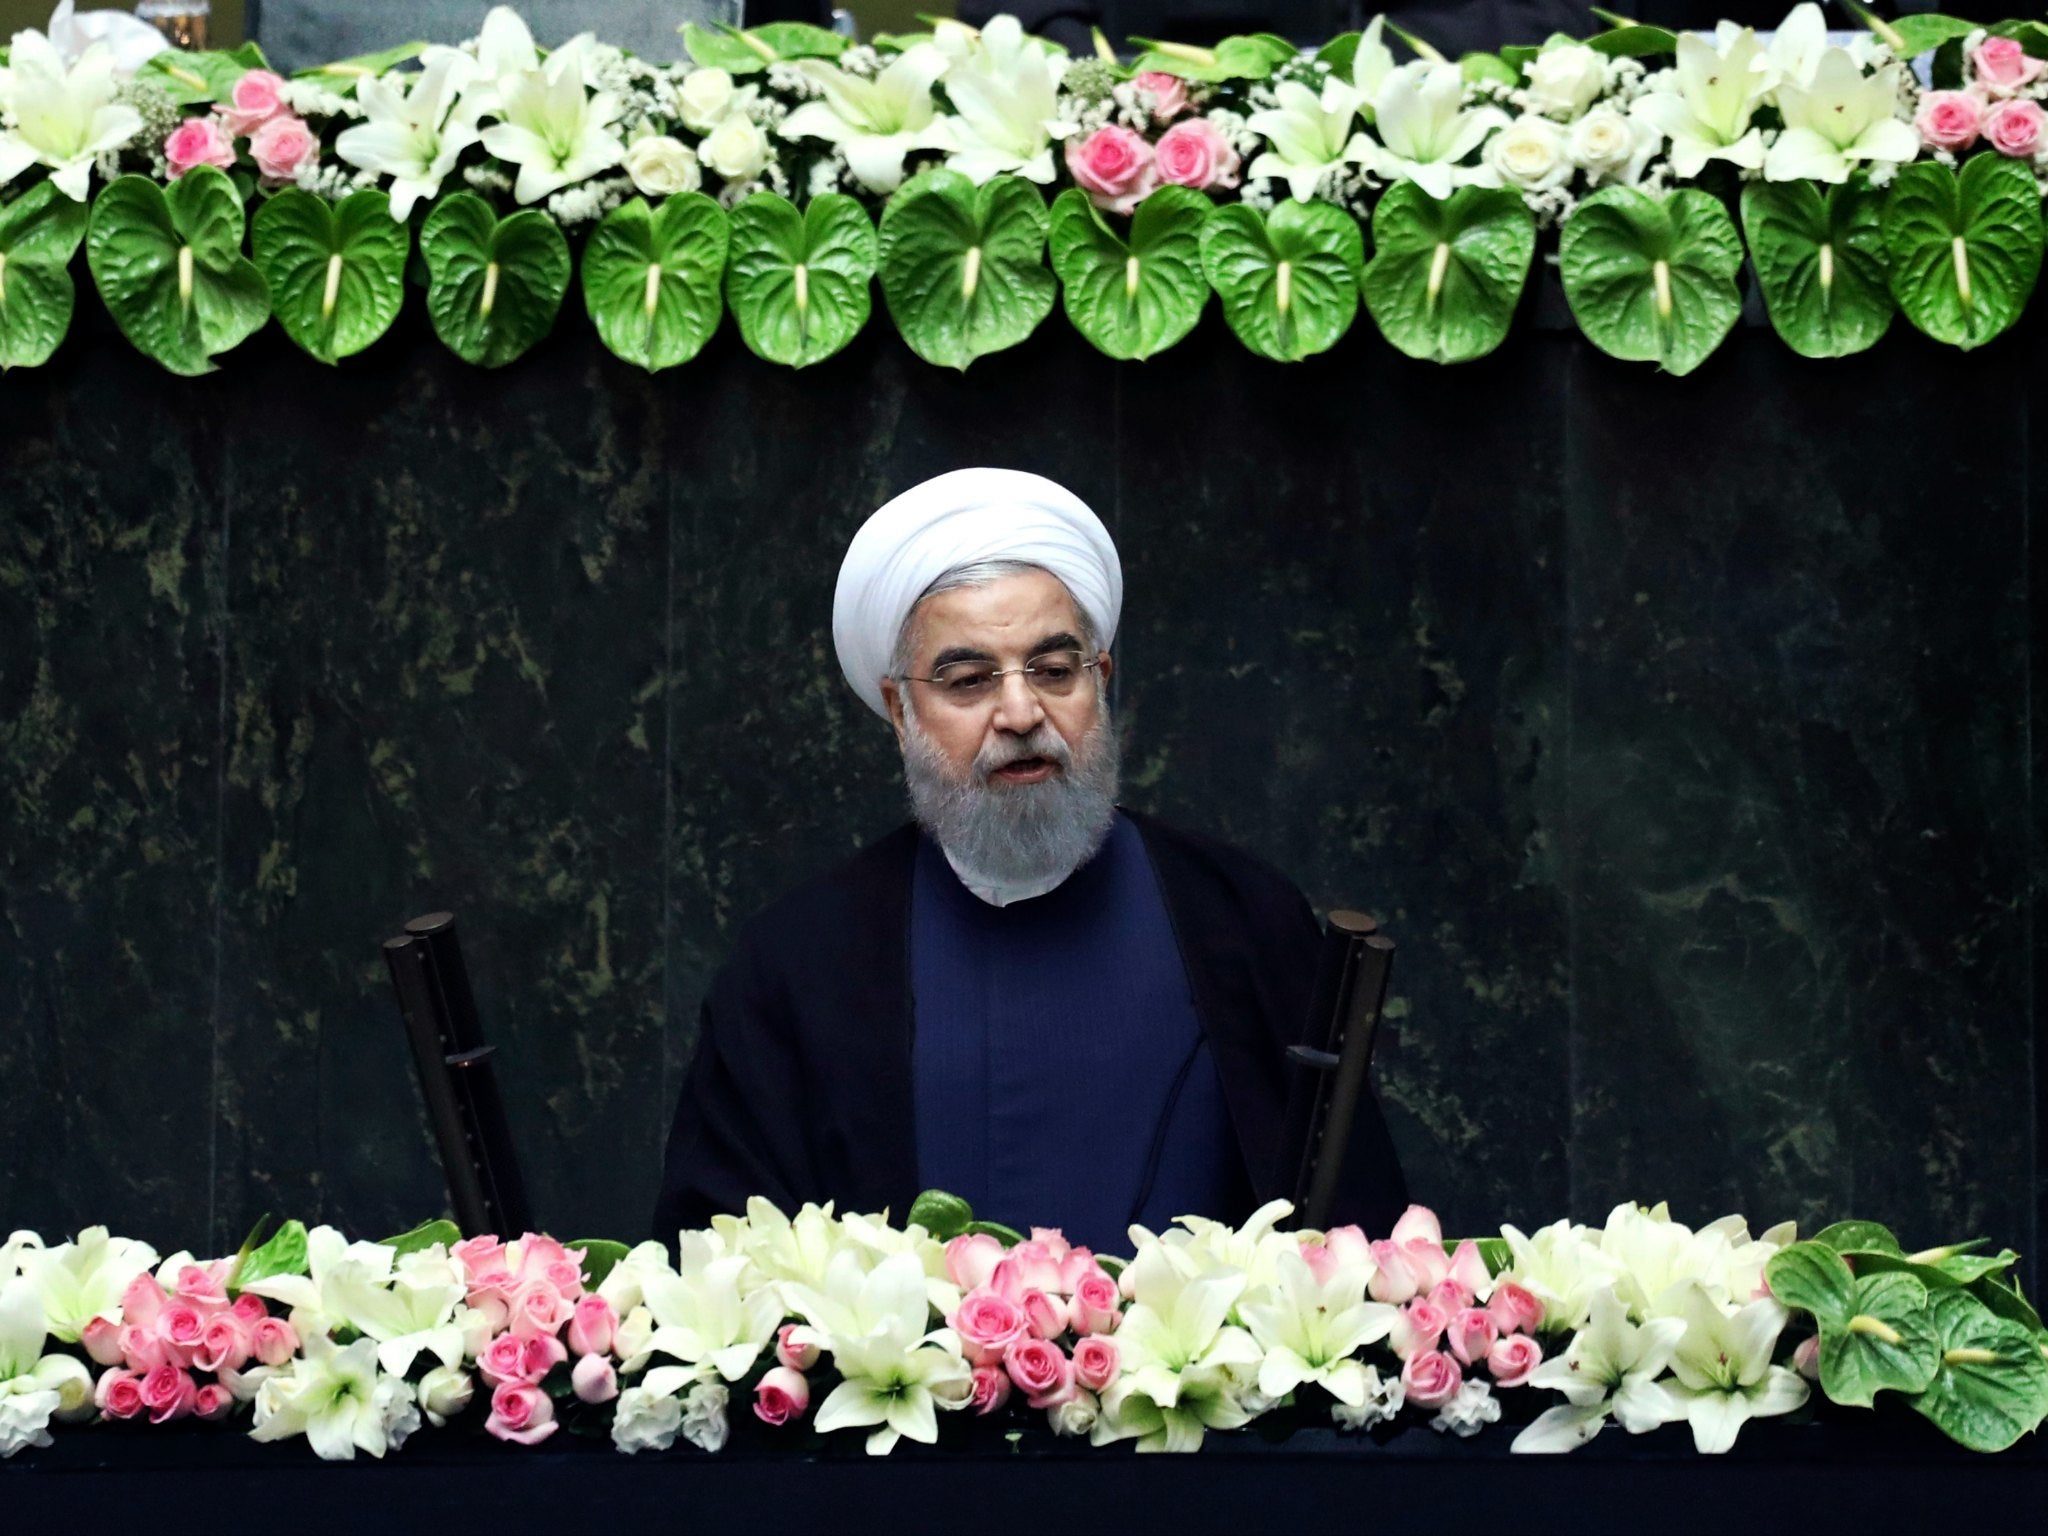 Iran's President Hasan Rouhani delivers a speech after his swearing-in ceremony